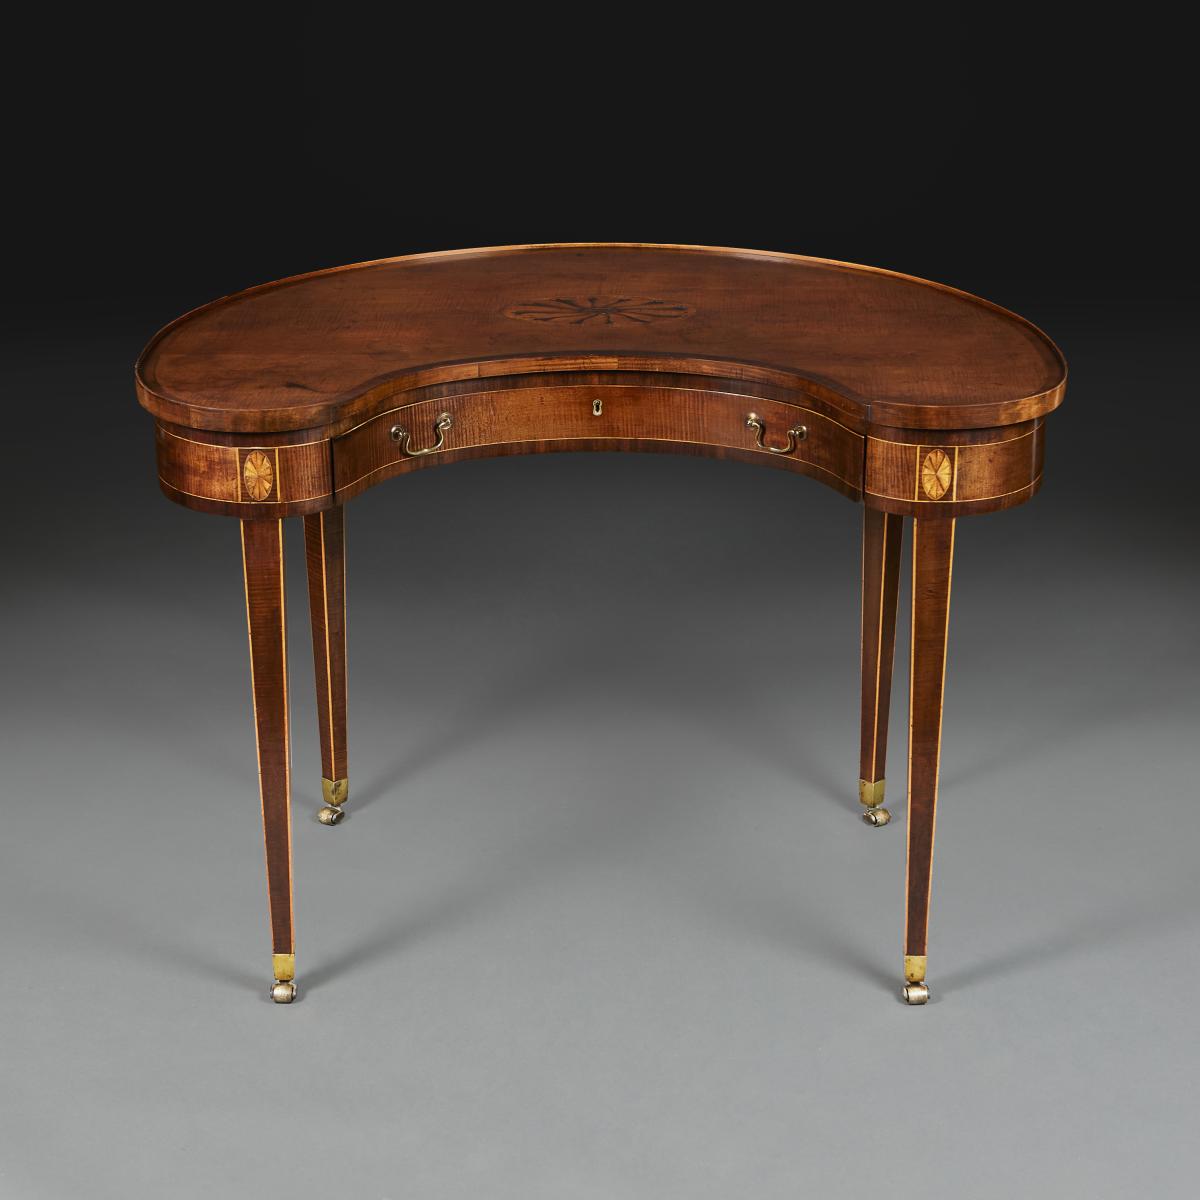 A Rare Kidney Shaped Writing Table